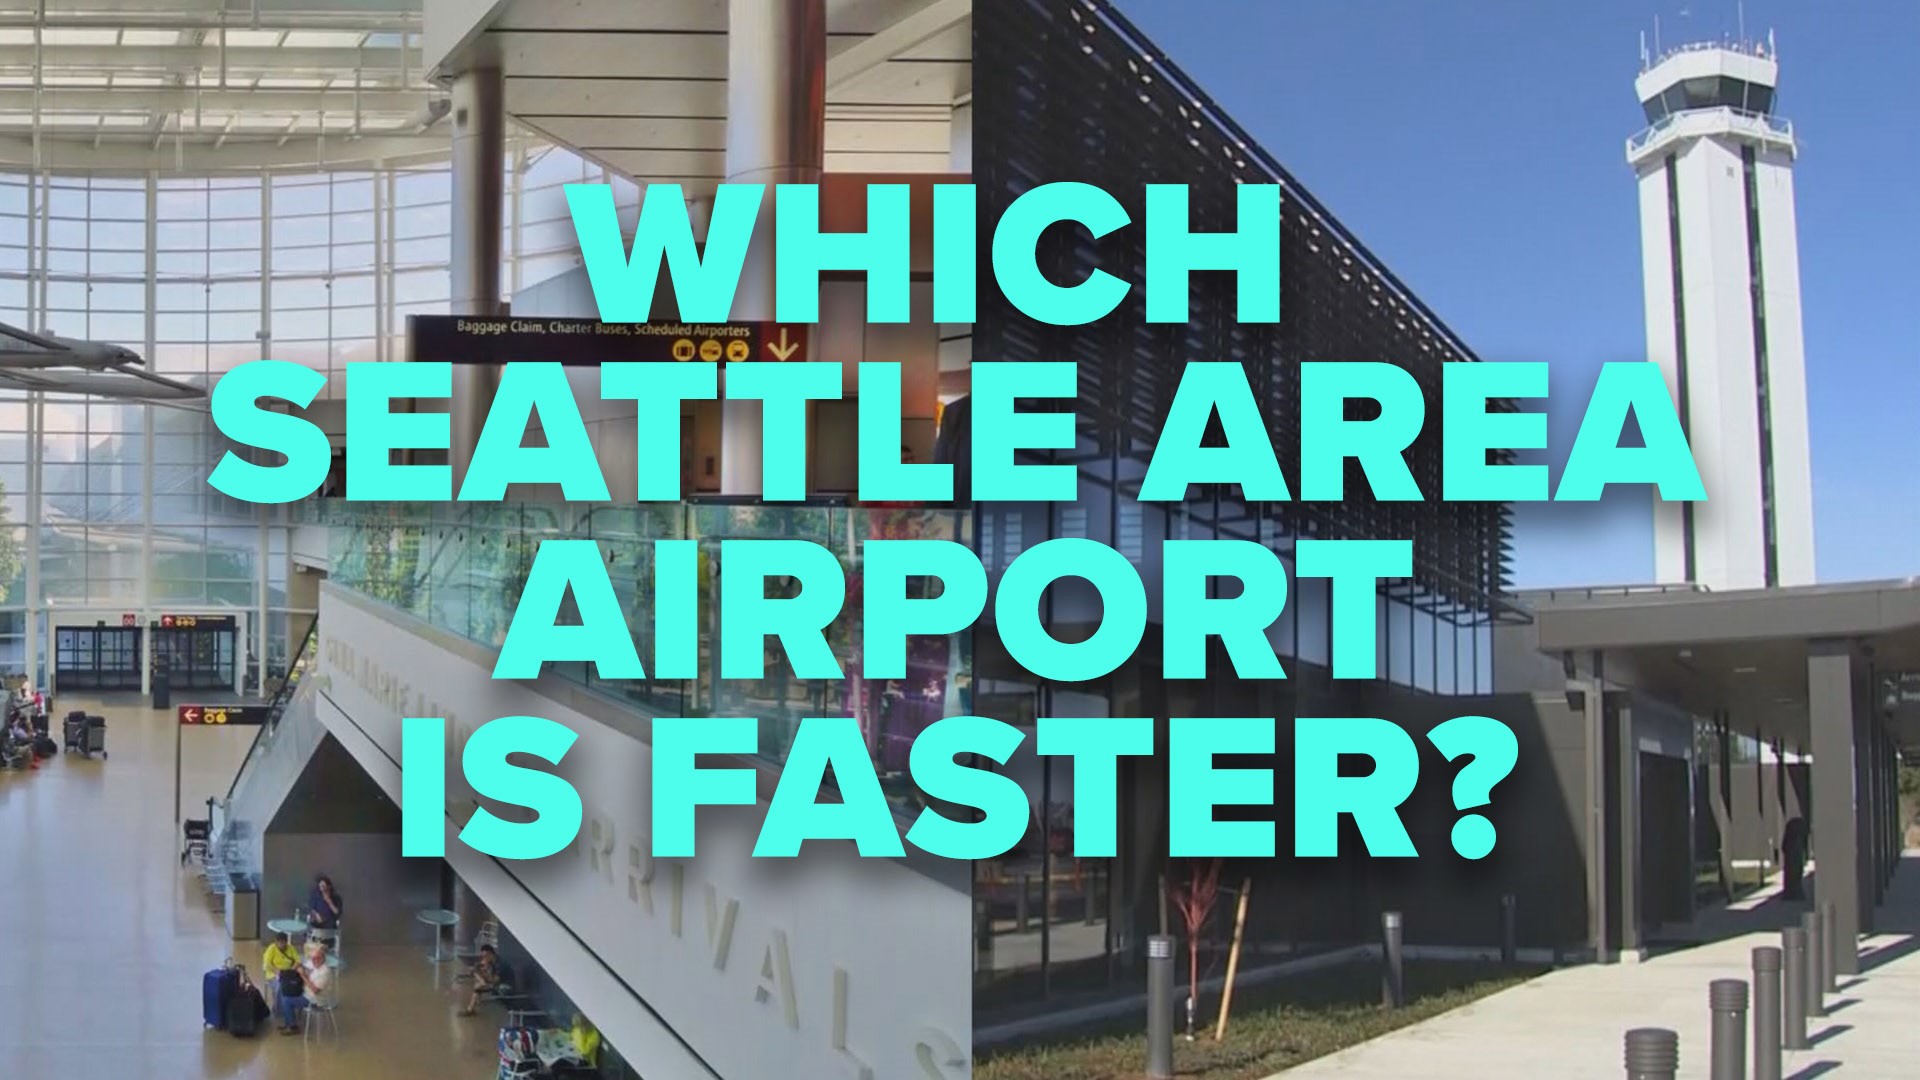 Jake Whittenberg and Ben Dery start at Green Lake Park, the geographical center between Paine Field and Sea-Tac airports, to see who gets to their terminal first.